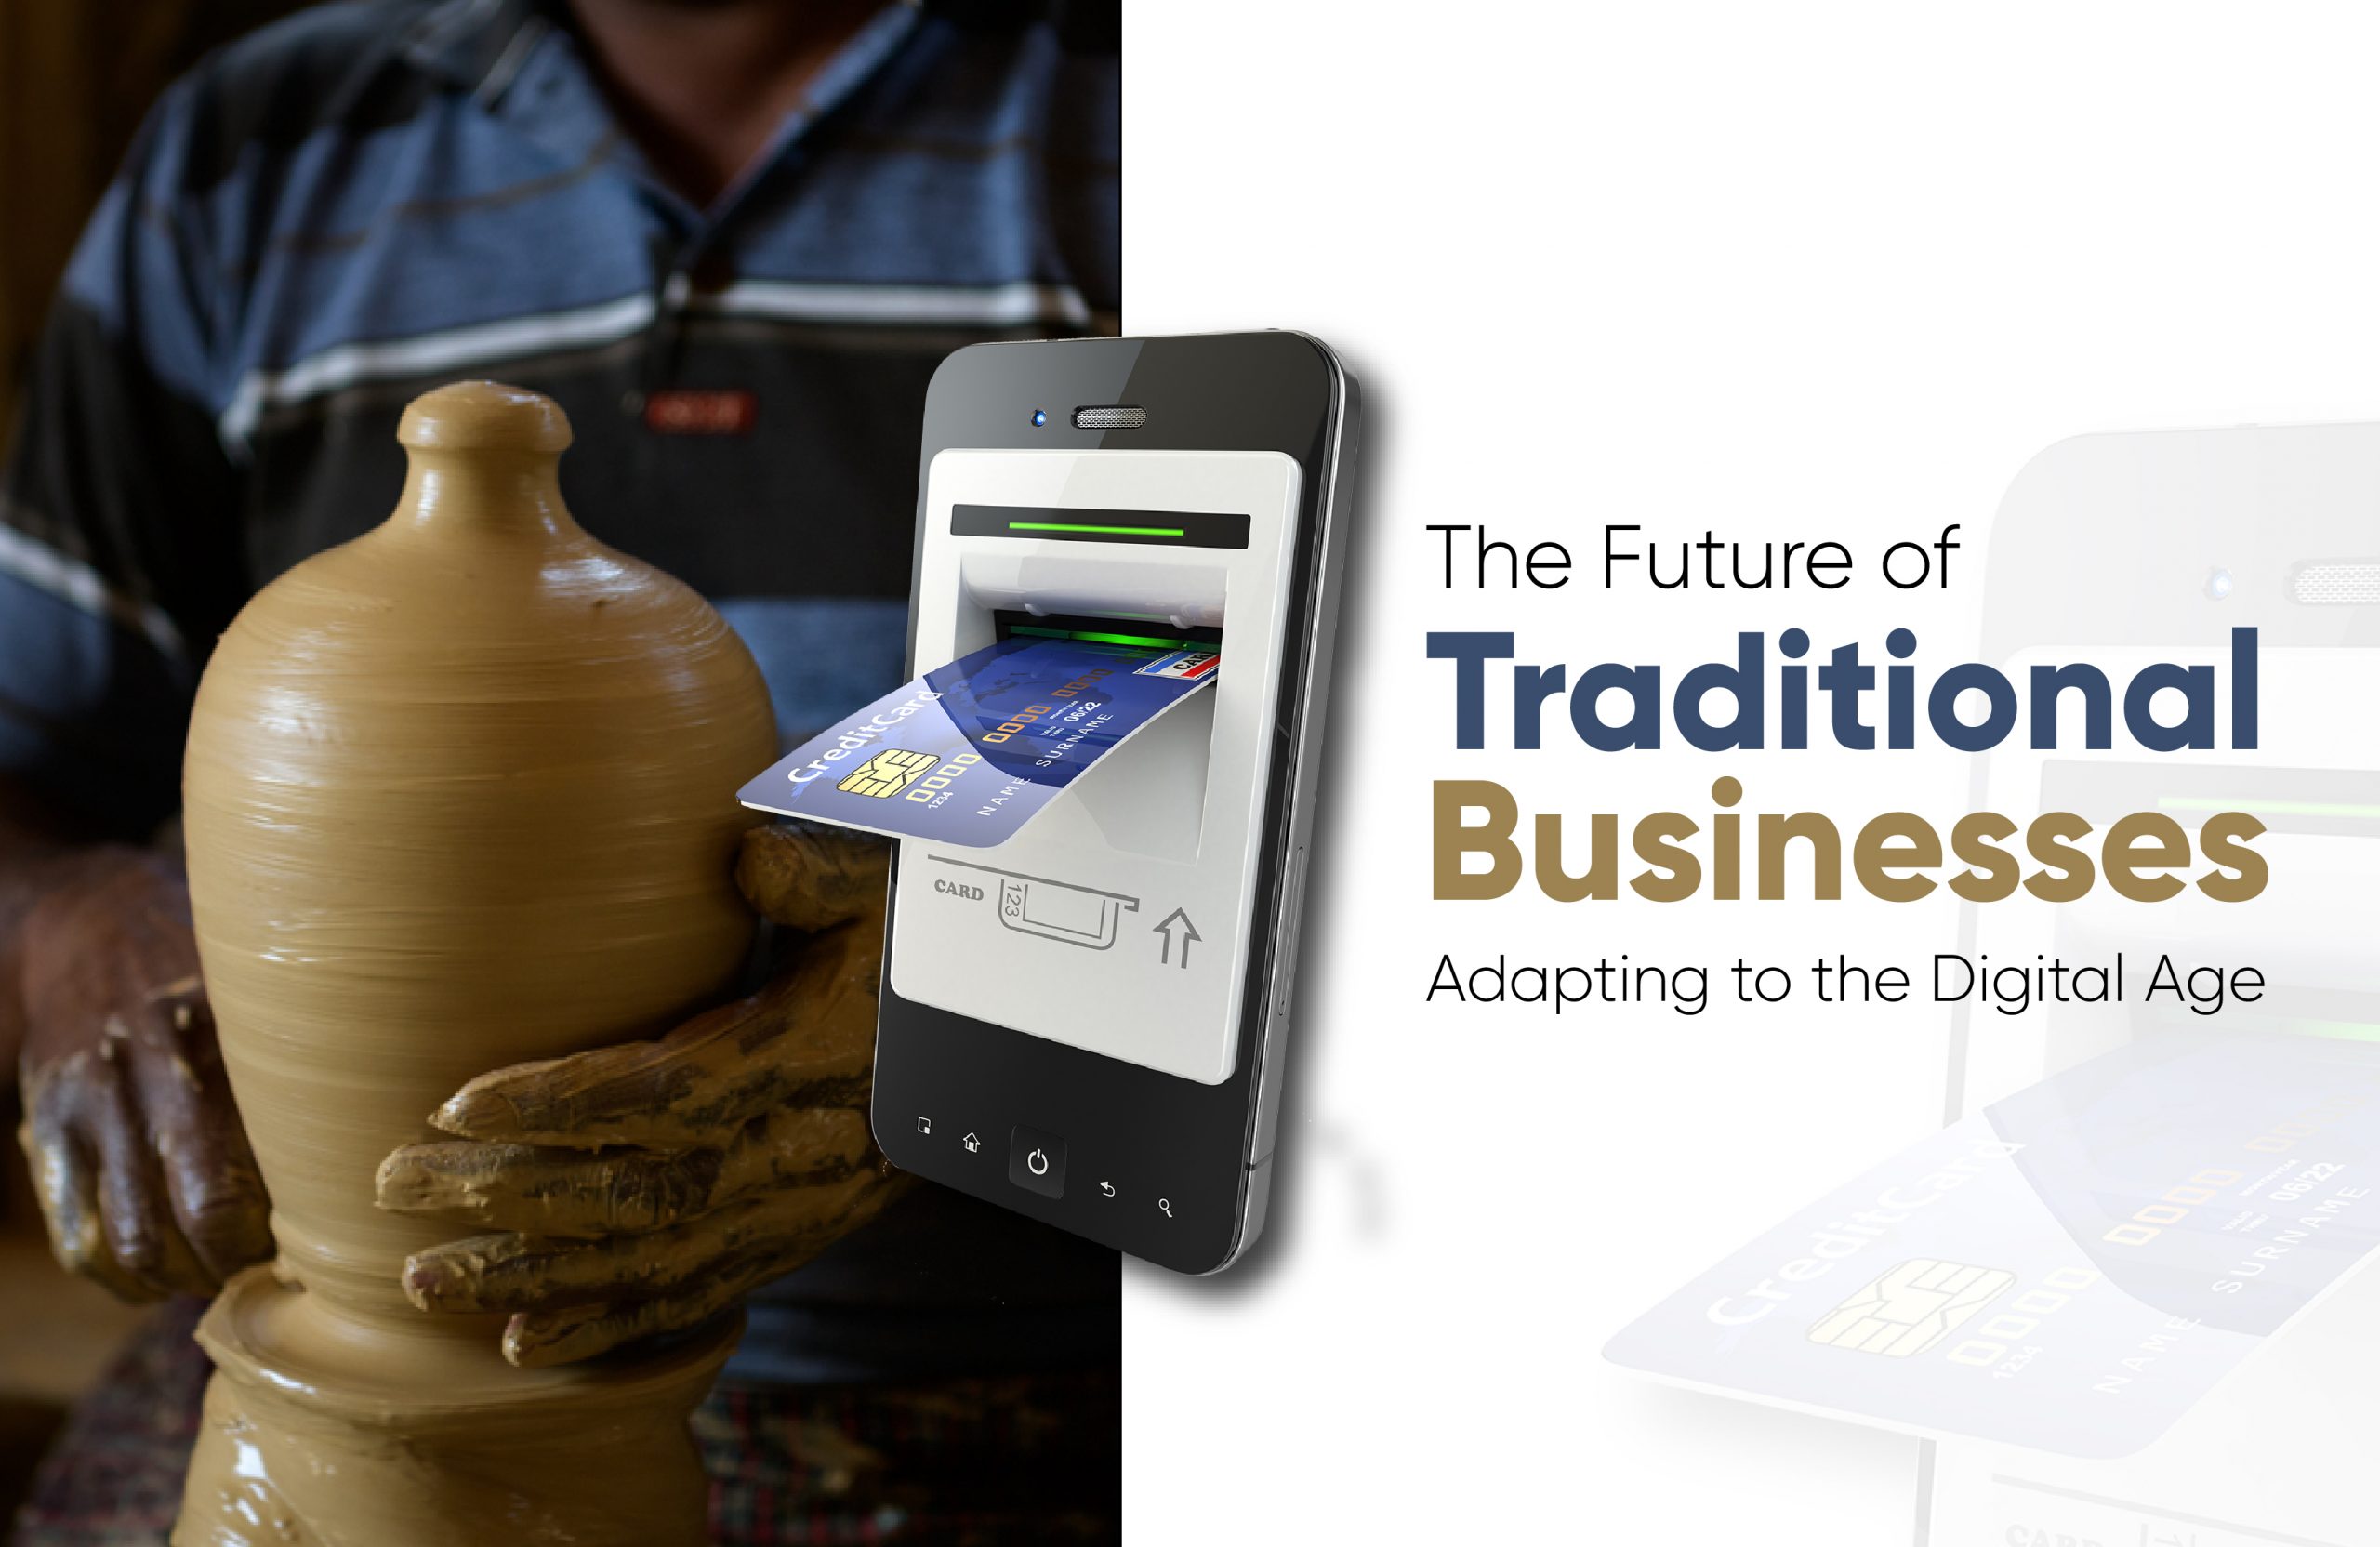 The Future of Traditional Businesses: Adapting to the Digital Age